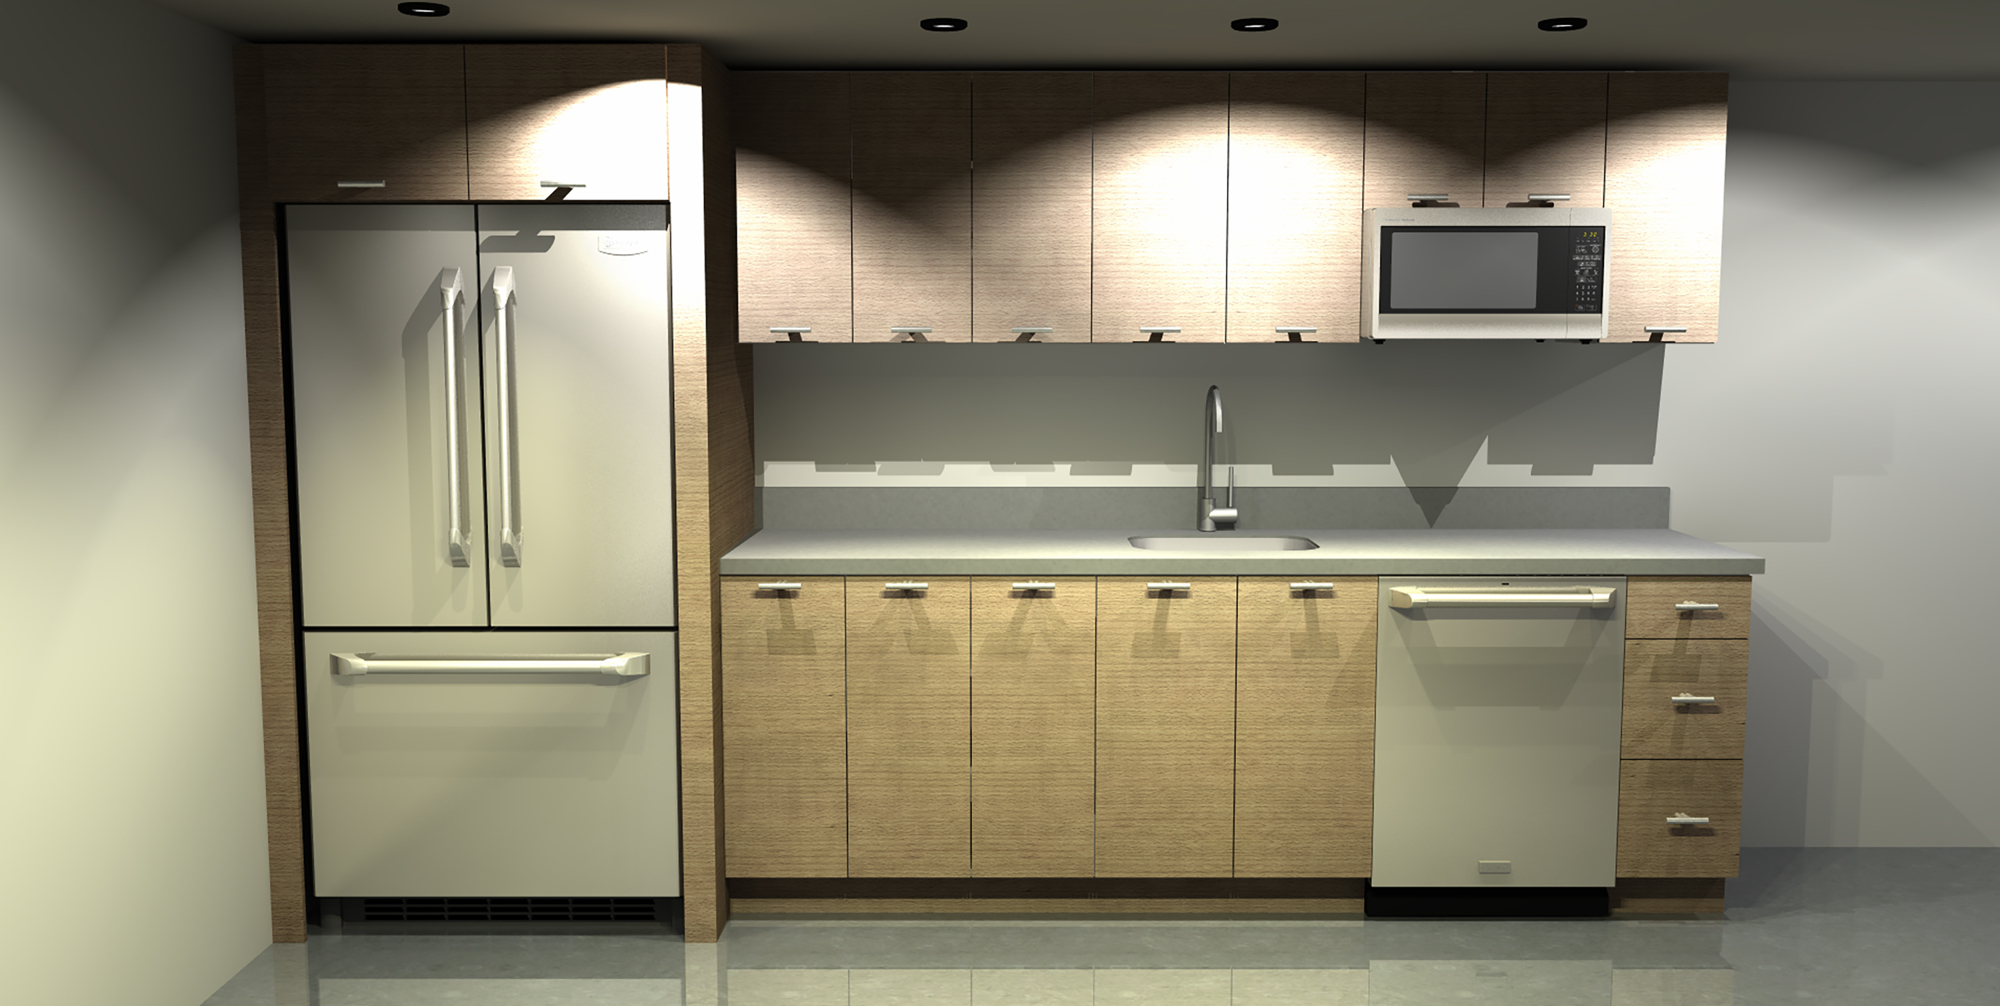 Island Storage Suites are plumbed and wired for kitchens and bathrooms.